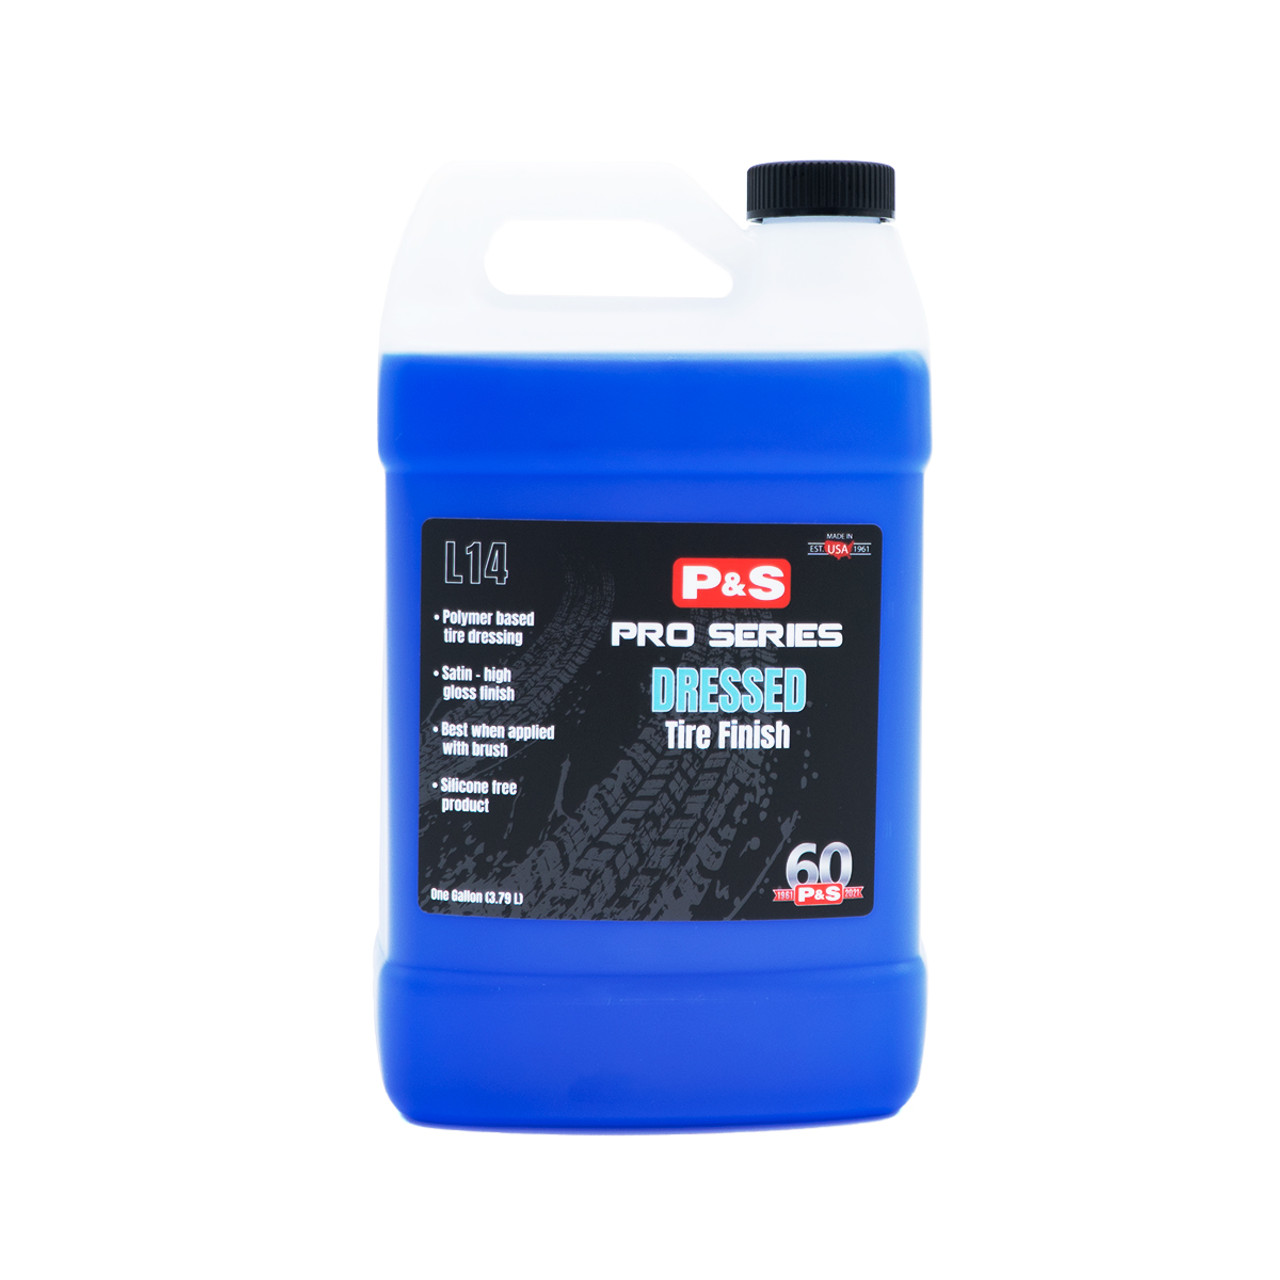  P&S Professional Detail Products - Swift Clean & Shine - Interior  Cleaner for Leather, Vinyl and Plastic, Pleasant Fragrance (1 Gallon) :  Automotive